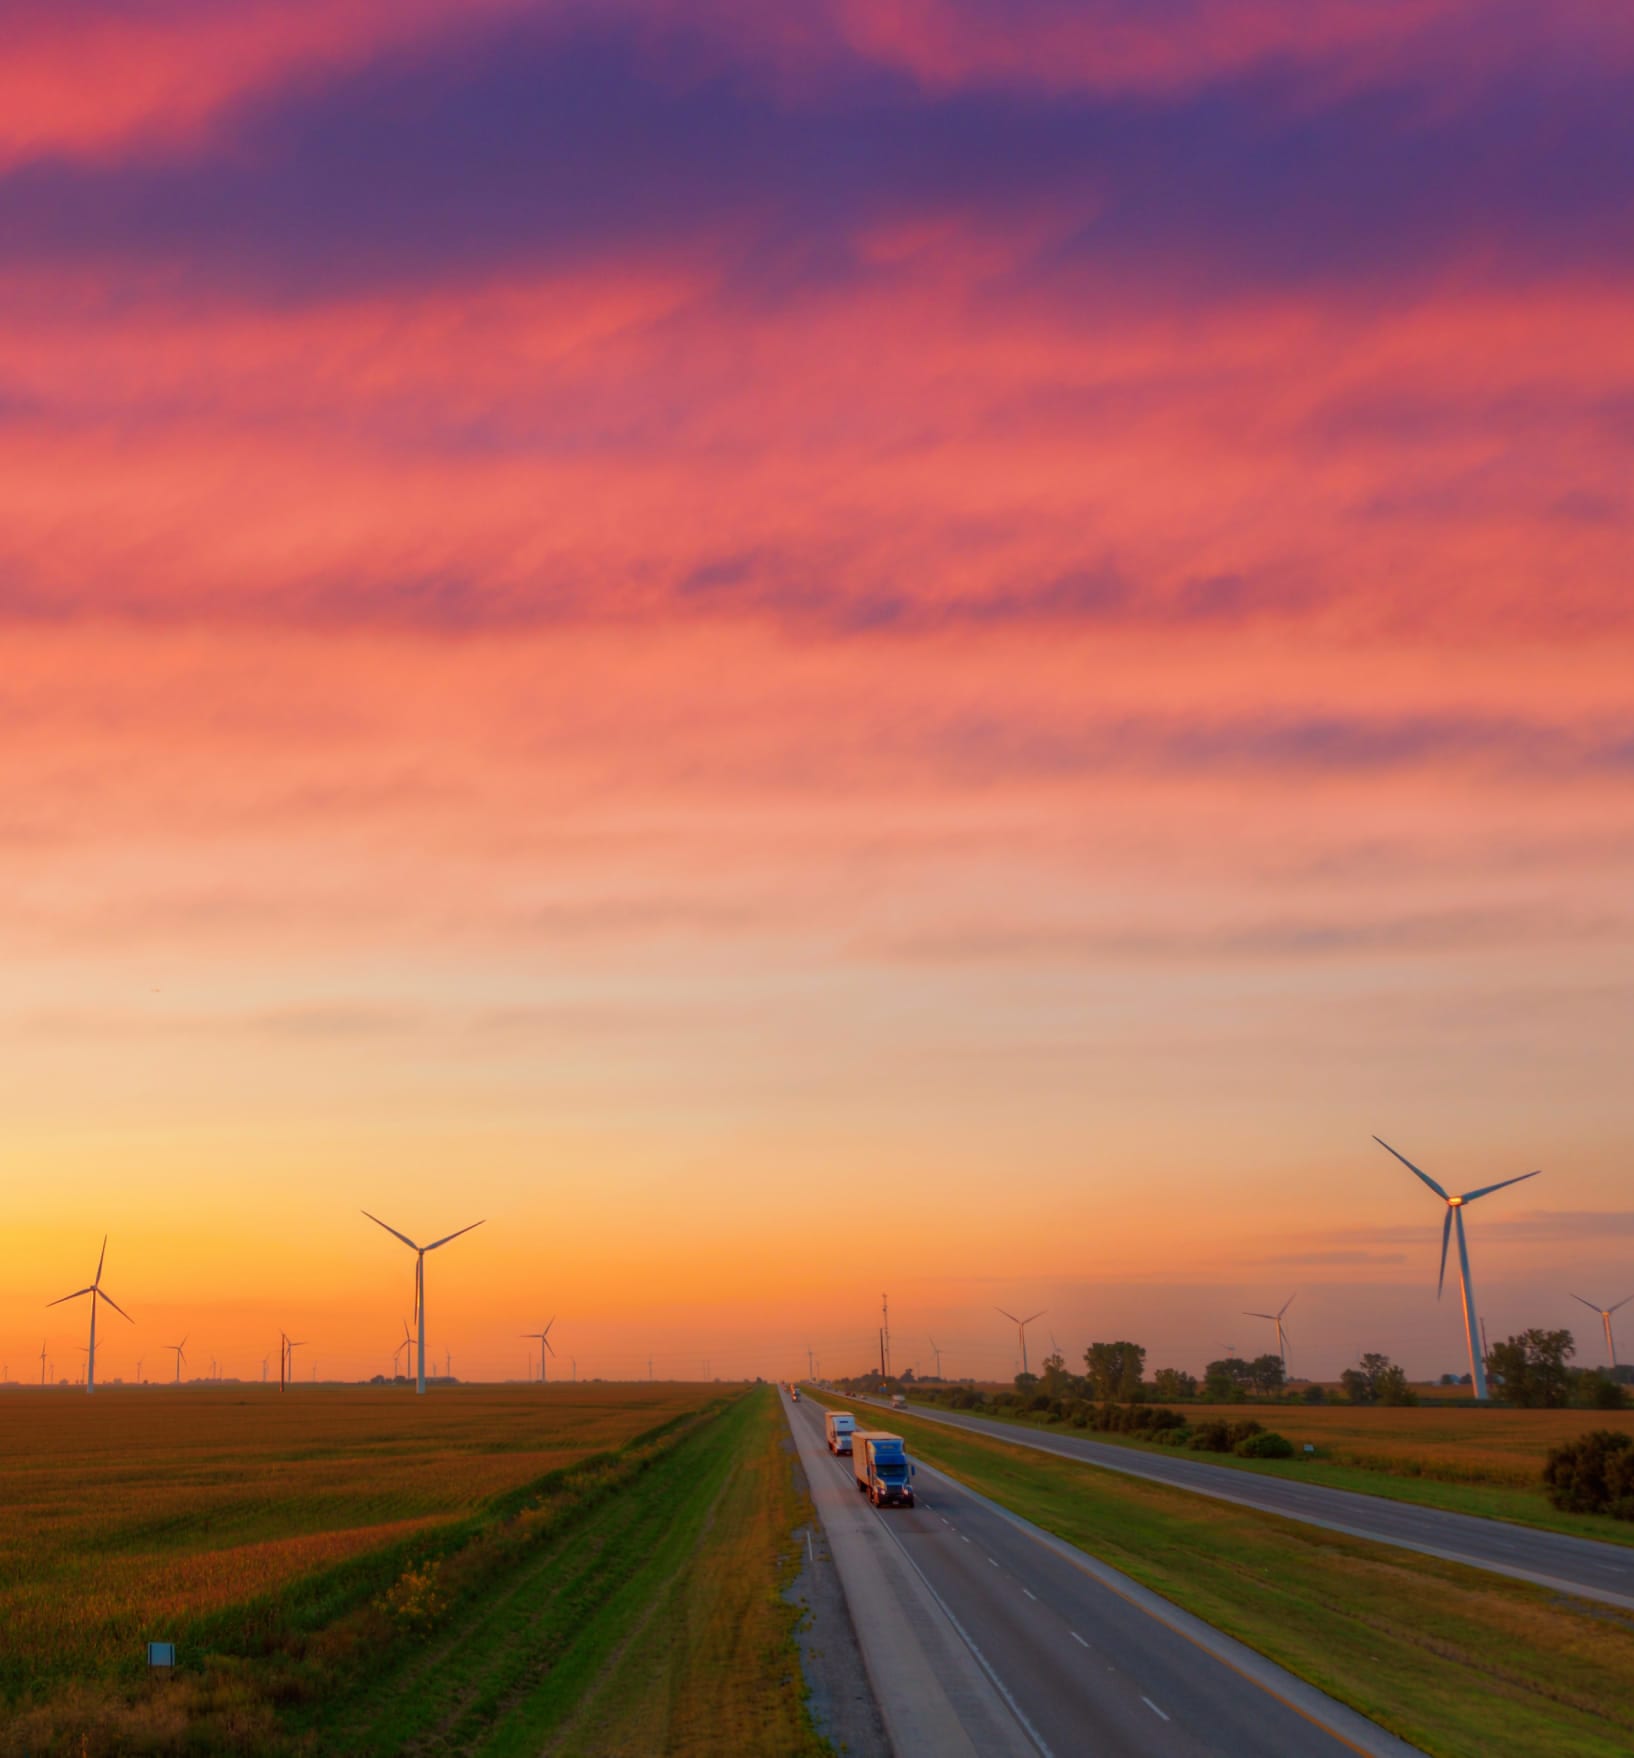 Semi trucks driving under a beautiful painted sky with wind turbines in the background.